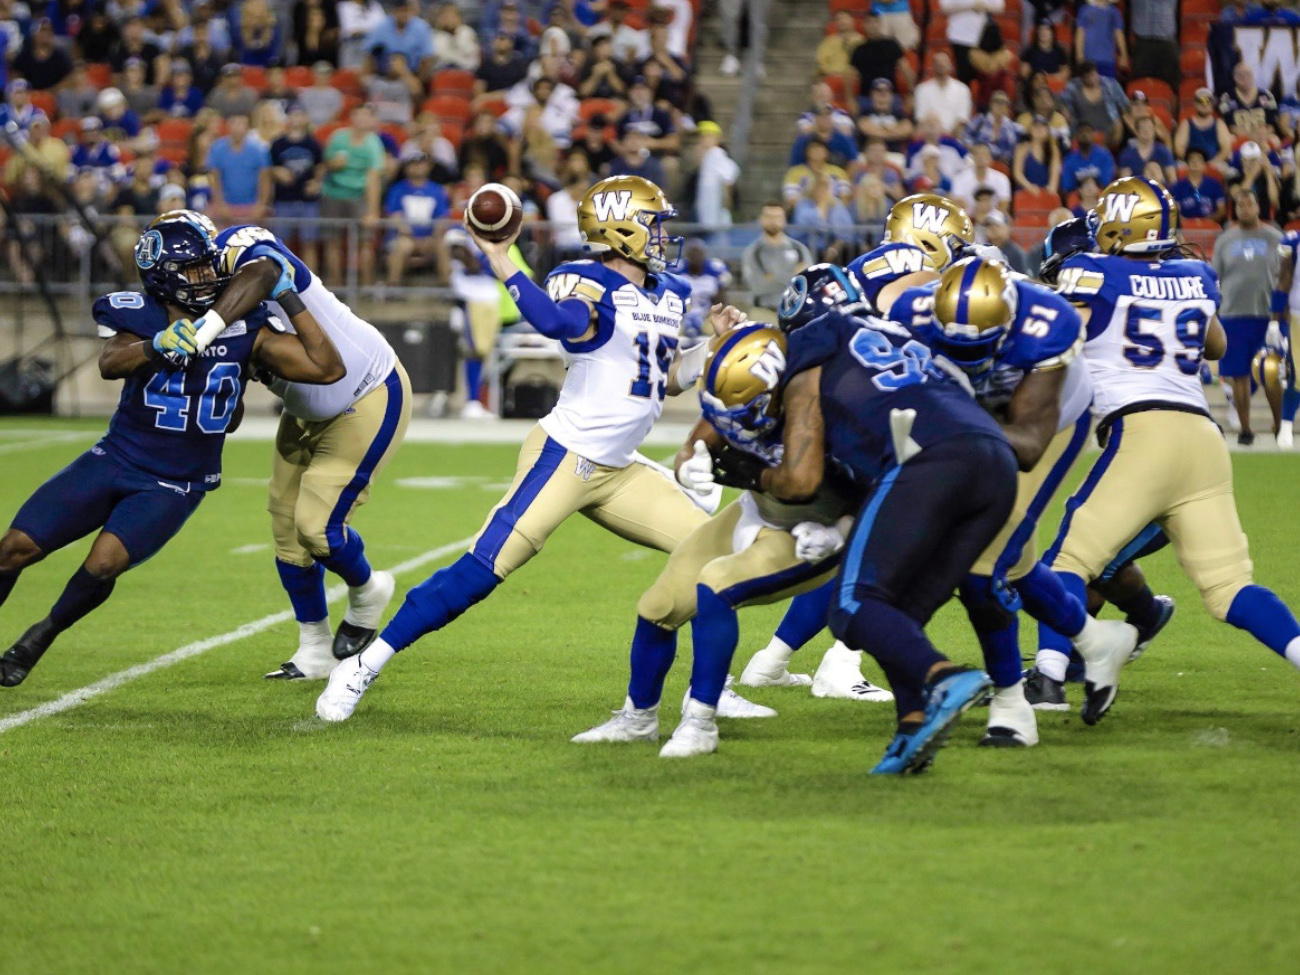 Vretta and the Canadian Football League Players’ Association (CFLPA) Partner to Strengthen Numeracy Skills for Players